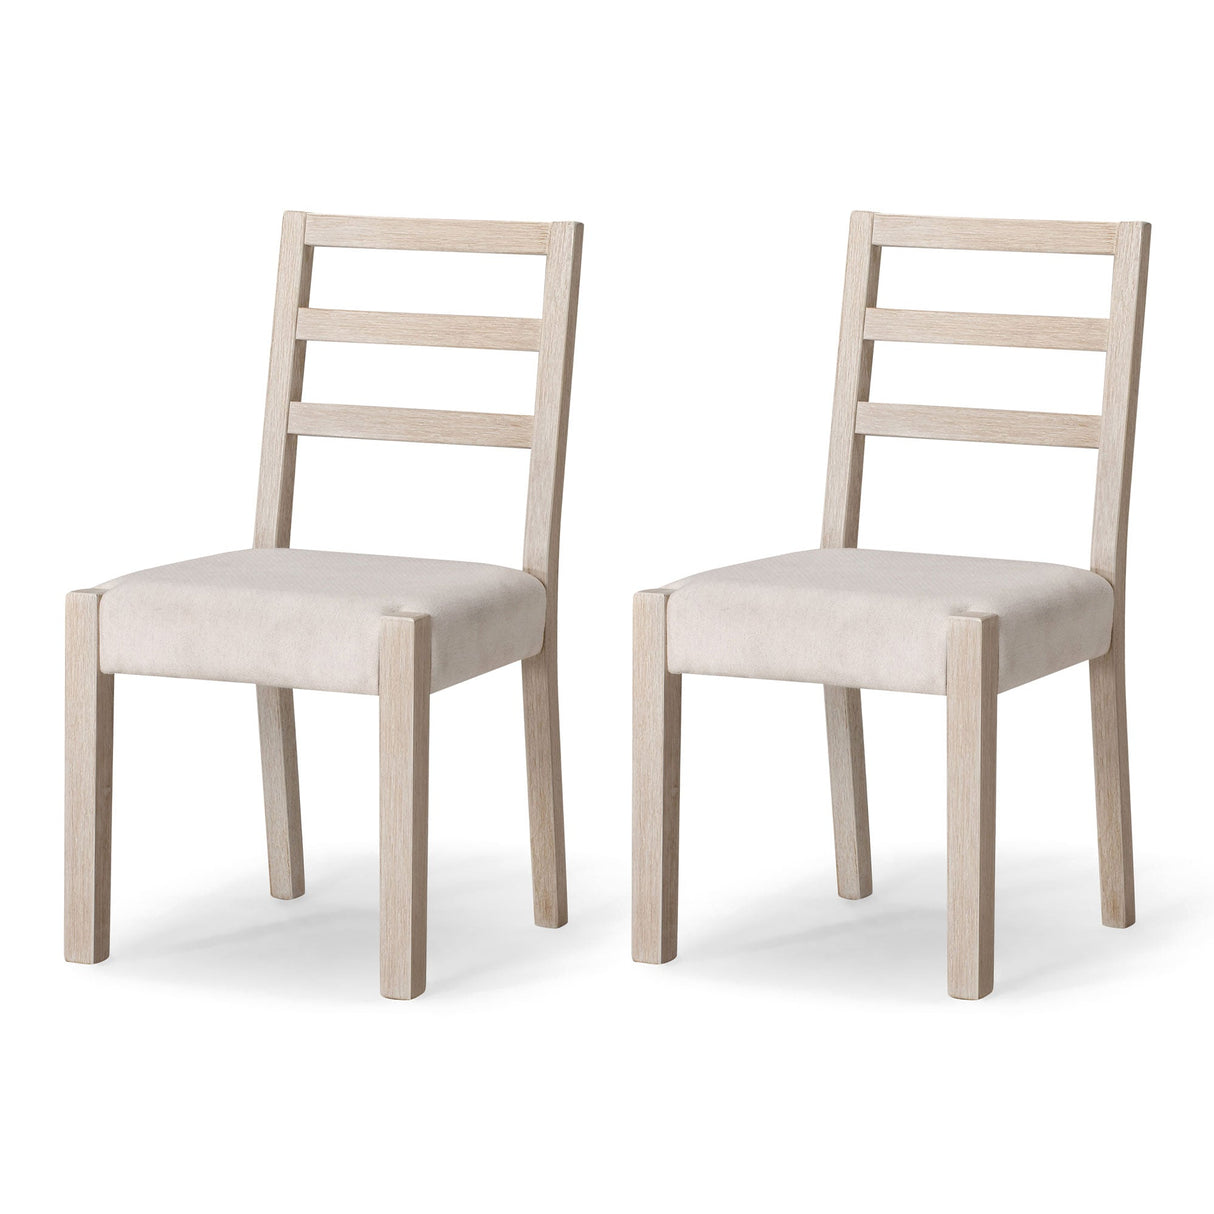 Maven Lane Willow Rustic Dining Chair, White With Cream Weave Fabric, Set of 2